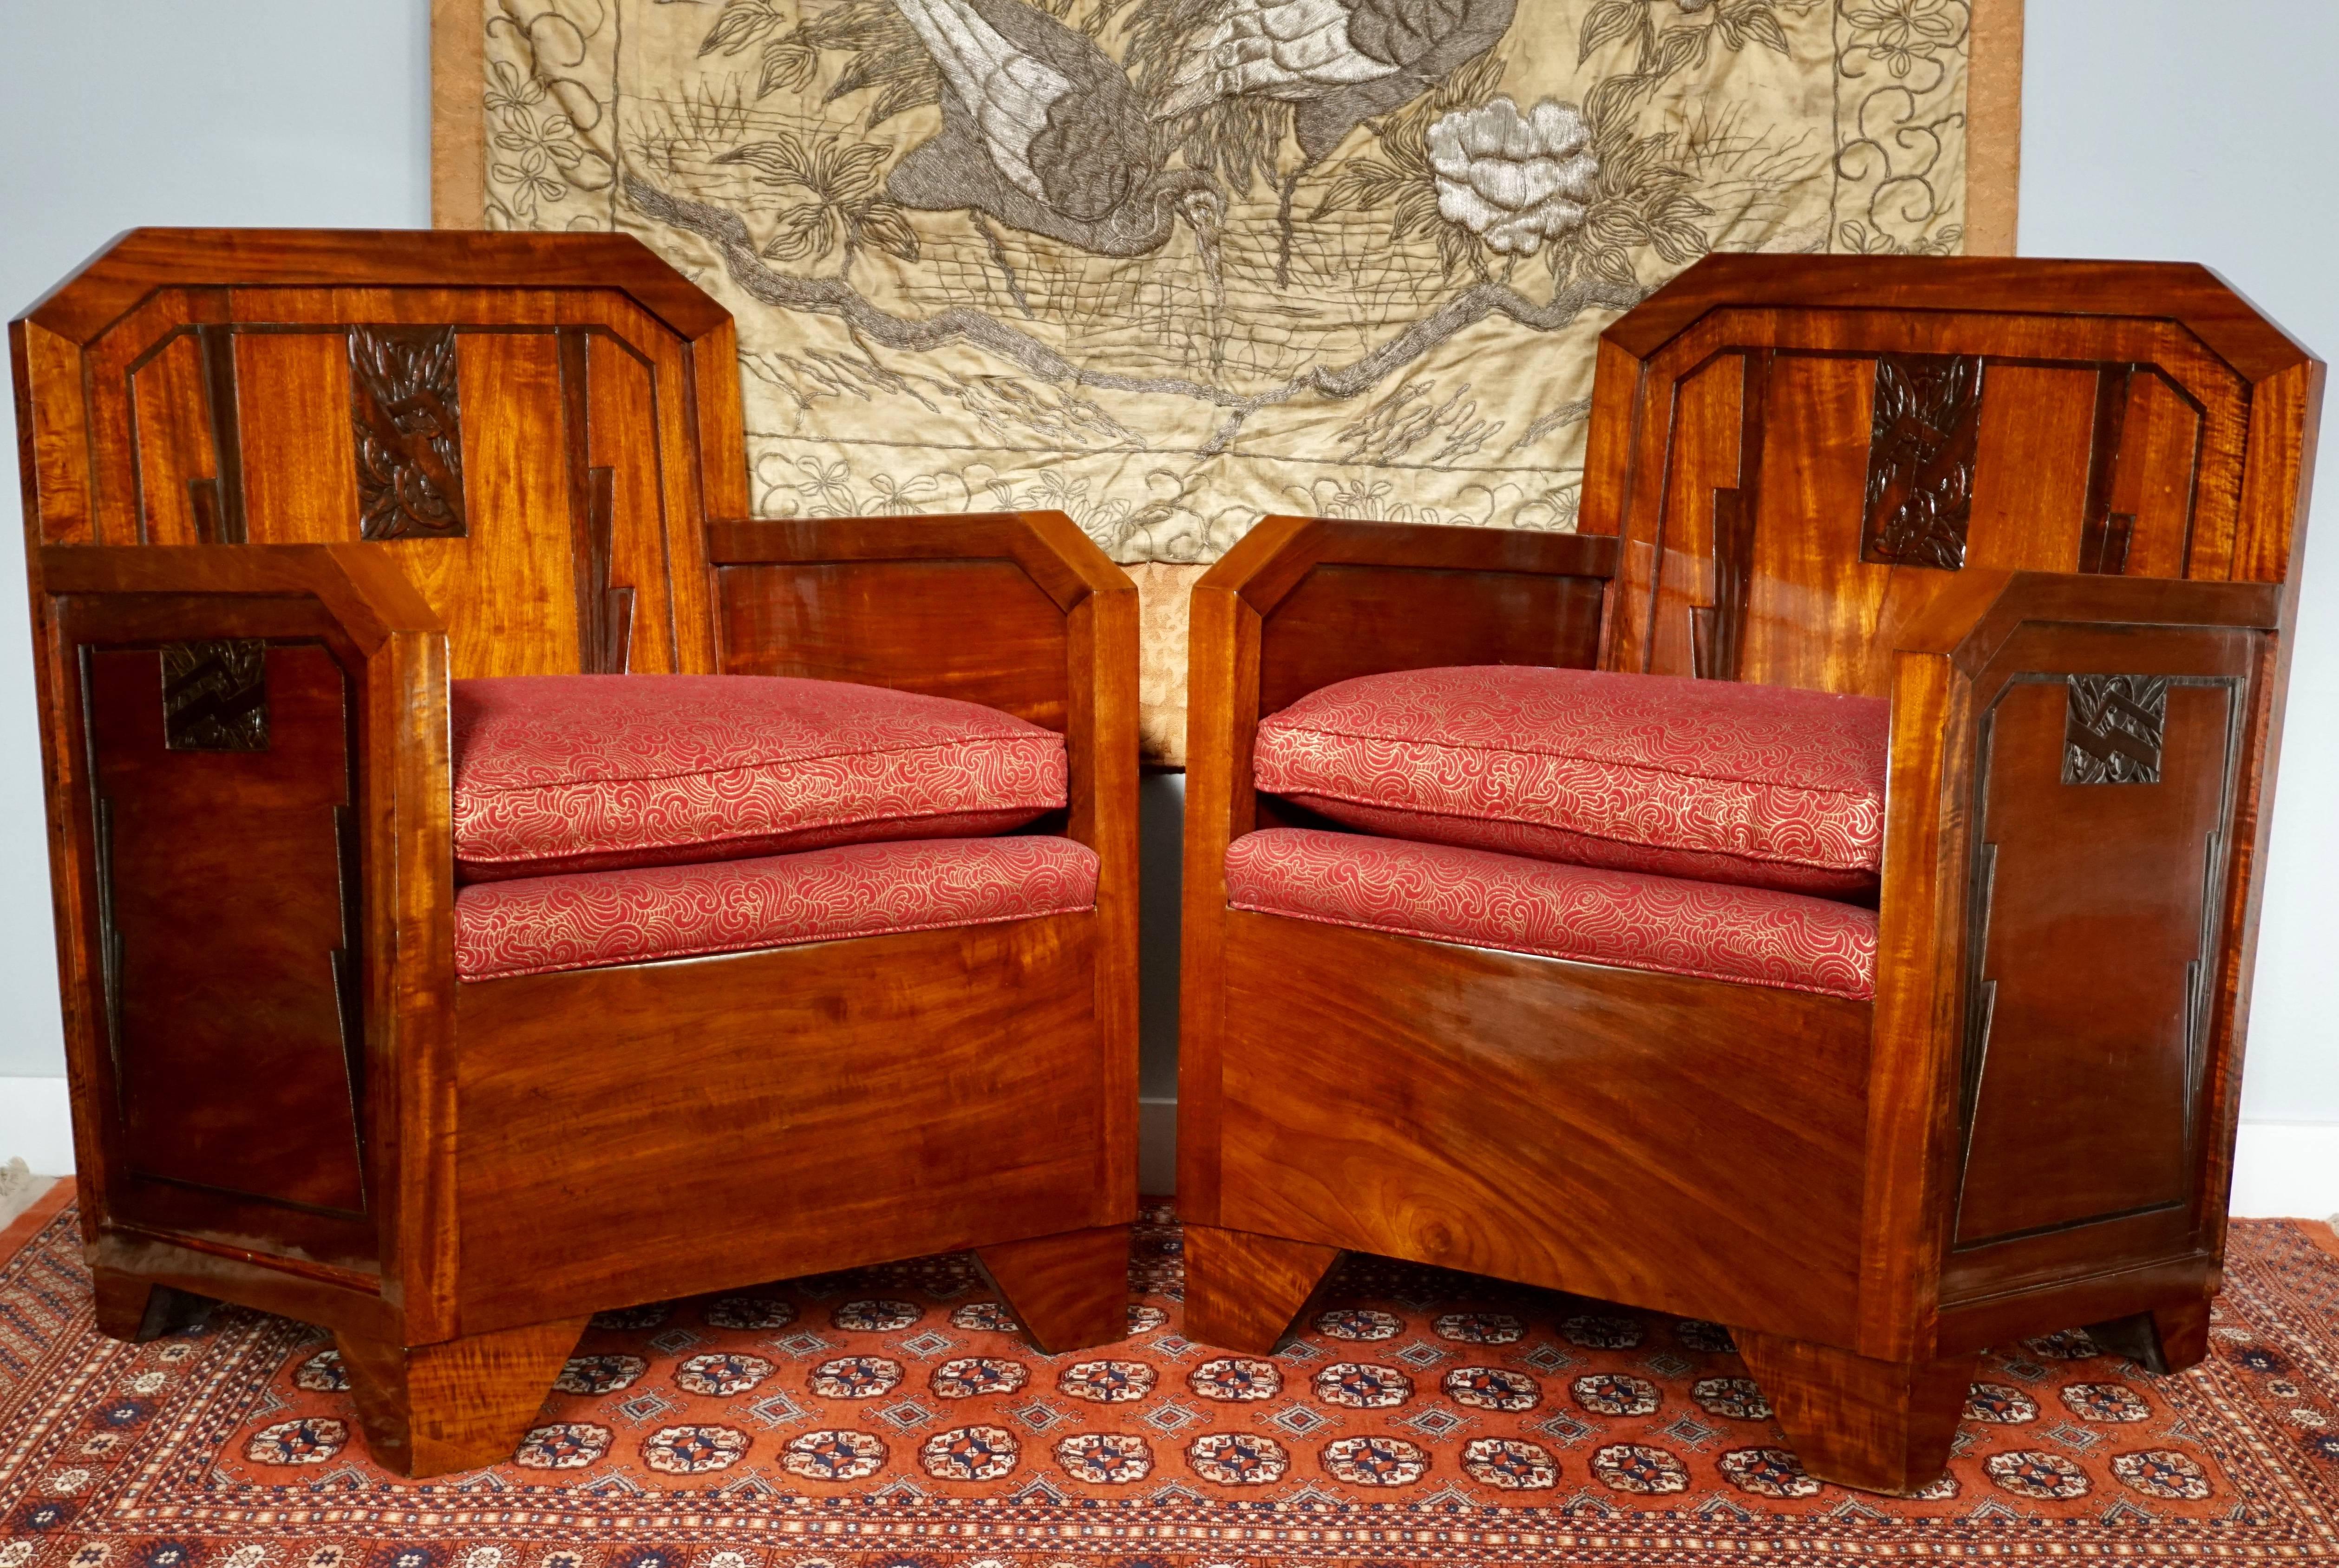 A pair of French Art Deco Bergères. Made of heavy, solid mahogany wood construction with hand-carved Art Deco decorated accents and lines. Upholstered in red fabric. Perfect for the cinema, movie or TV room or man cave. The quintessential Lounge